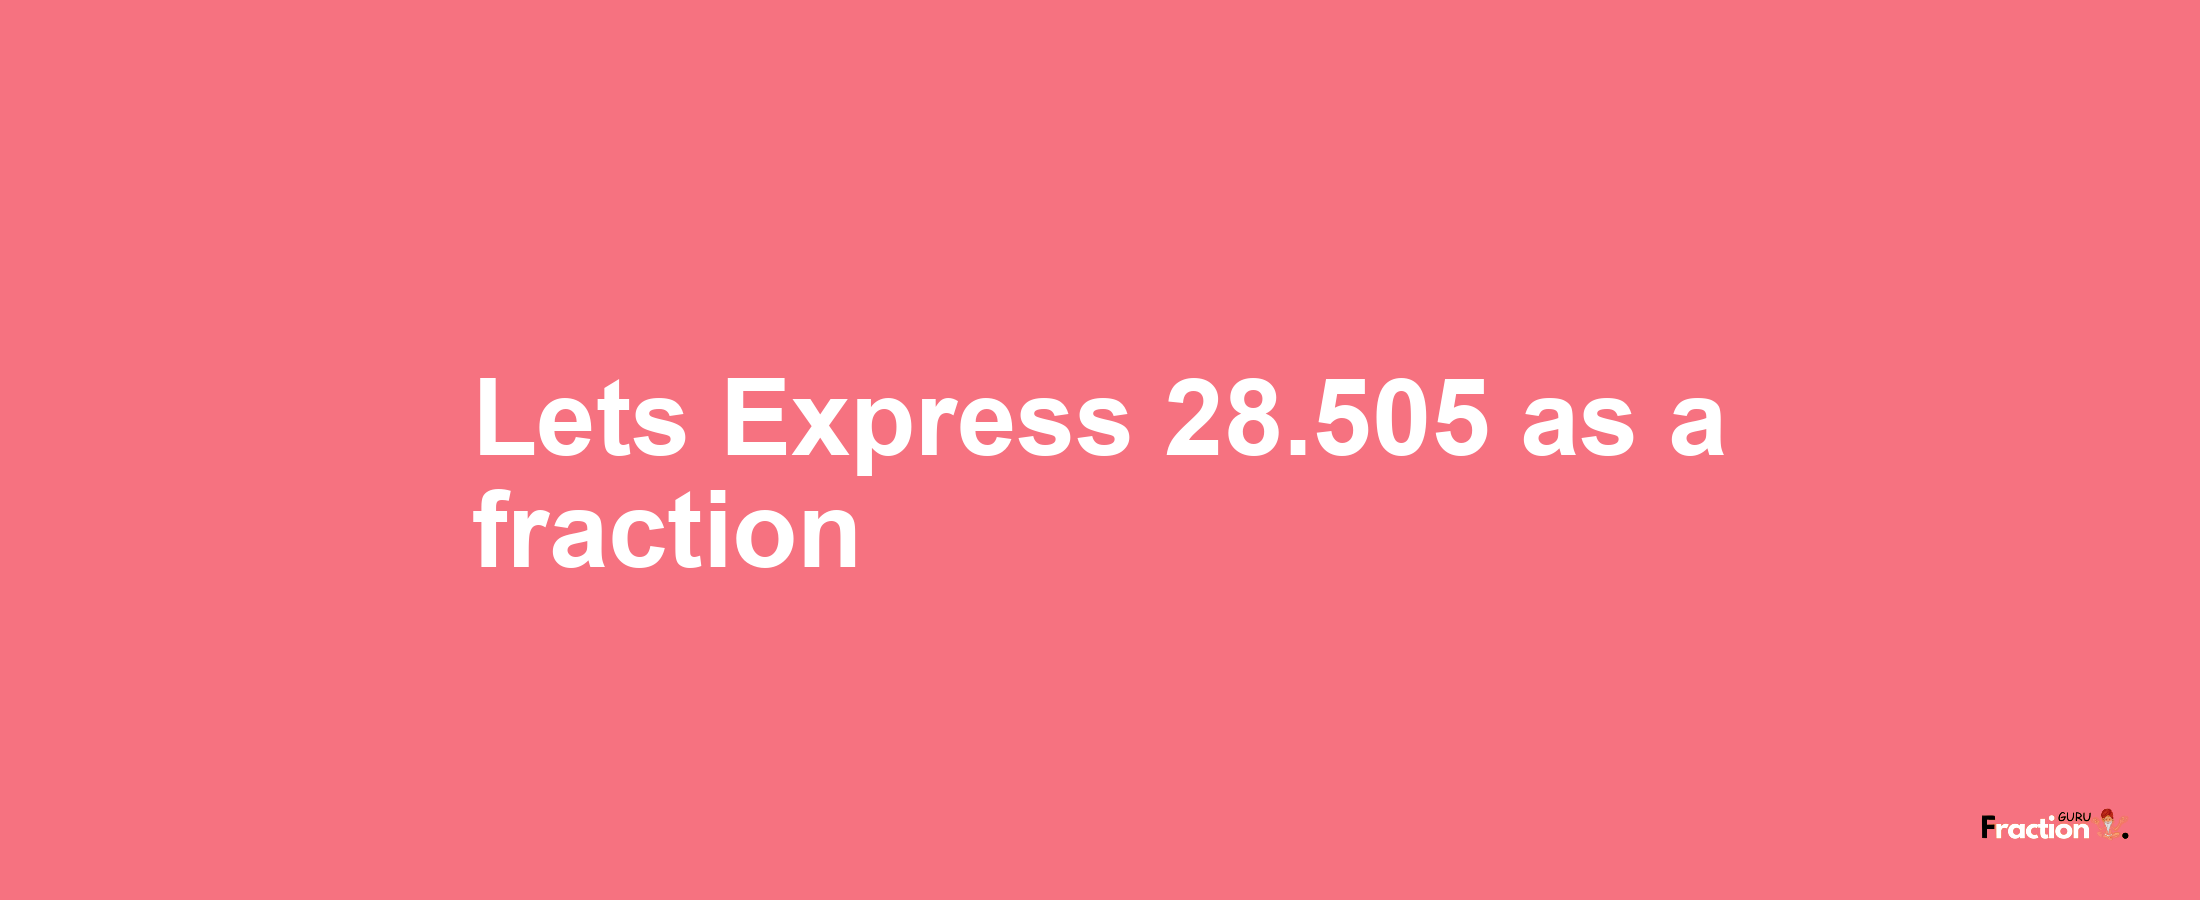 Lets Express 28.505 as afraction